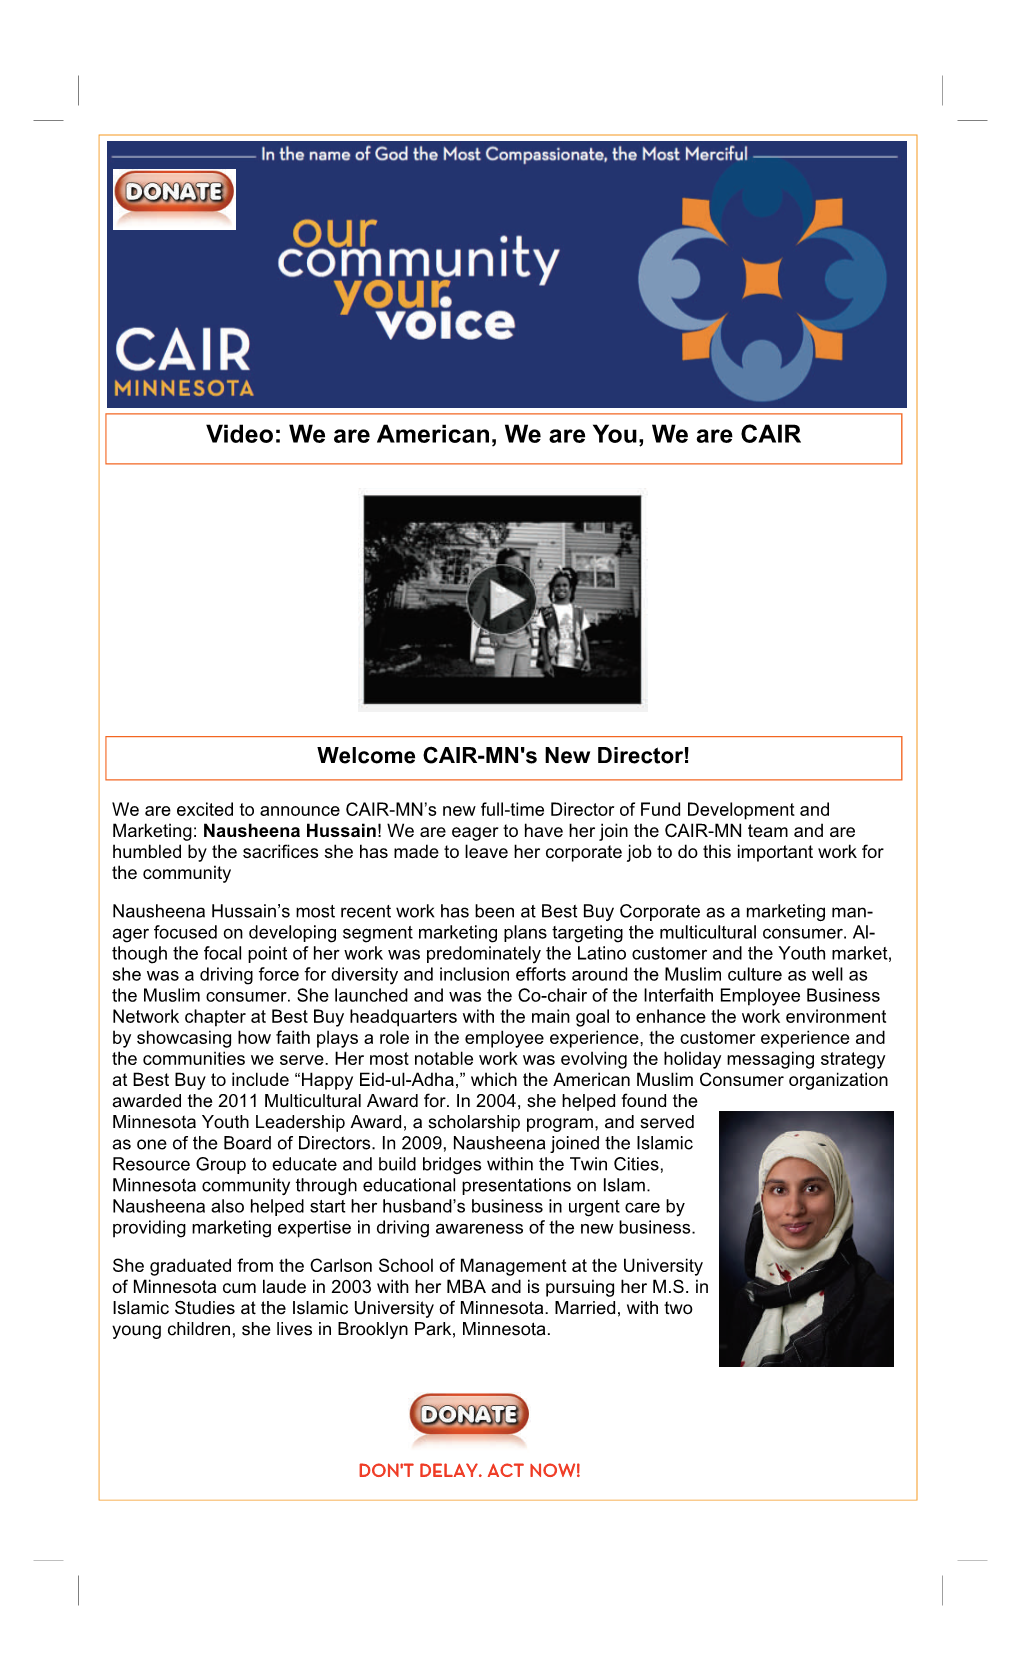 We Are American, We Are You, We Are CAIR